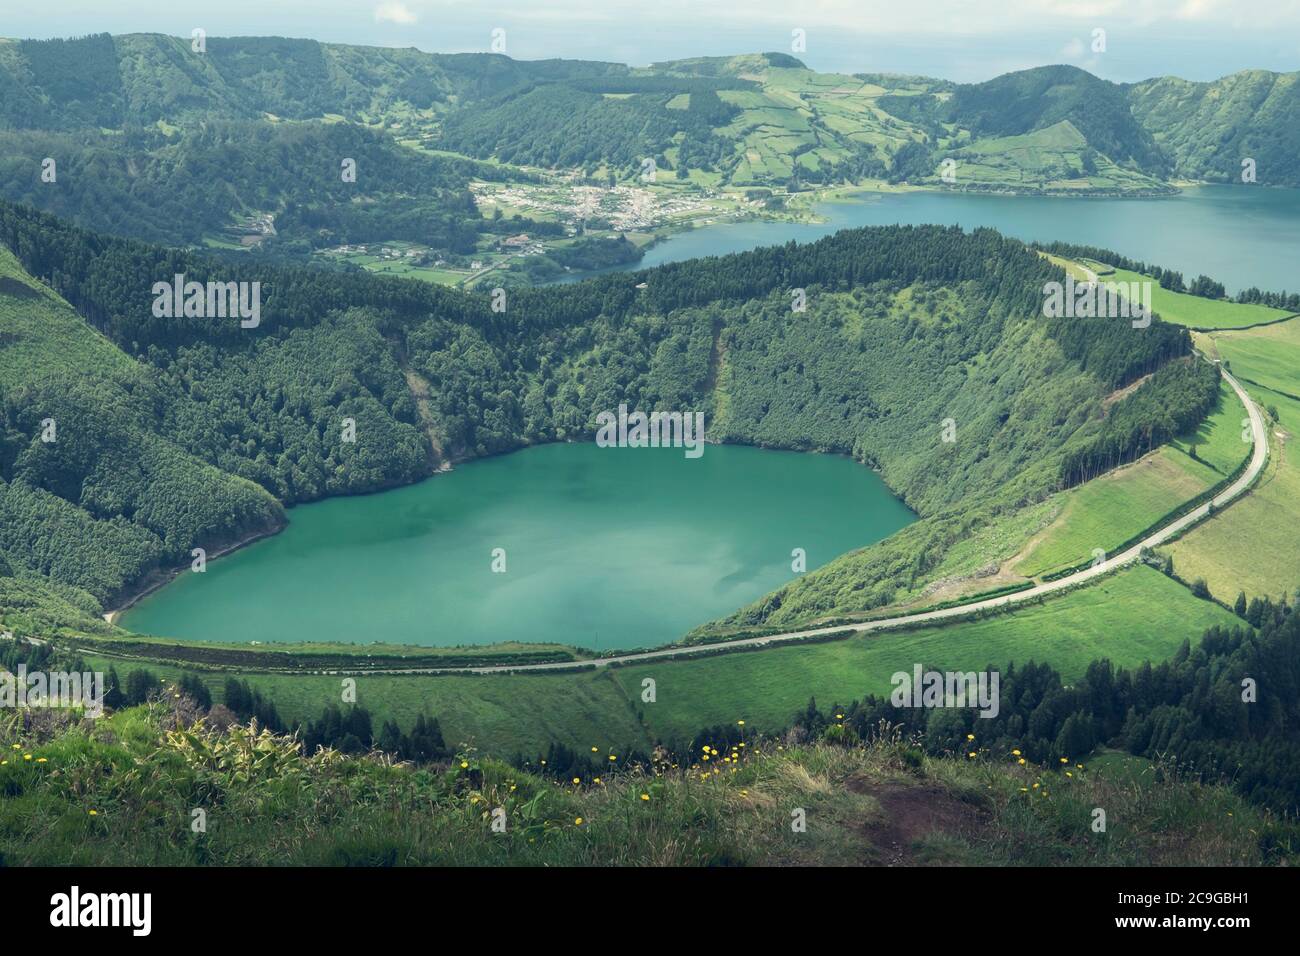 Aerial view of Boca do Inferno - lakes in Sete Cidades volcanic craters on San Miguel island, Azores, Portugal Stock Photo